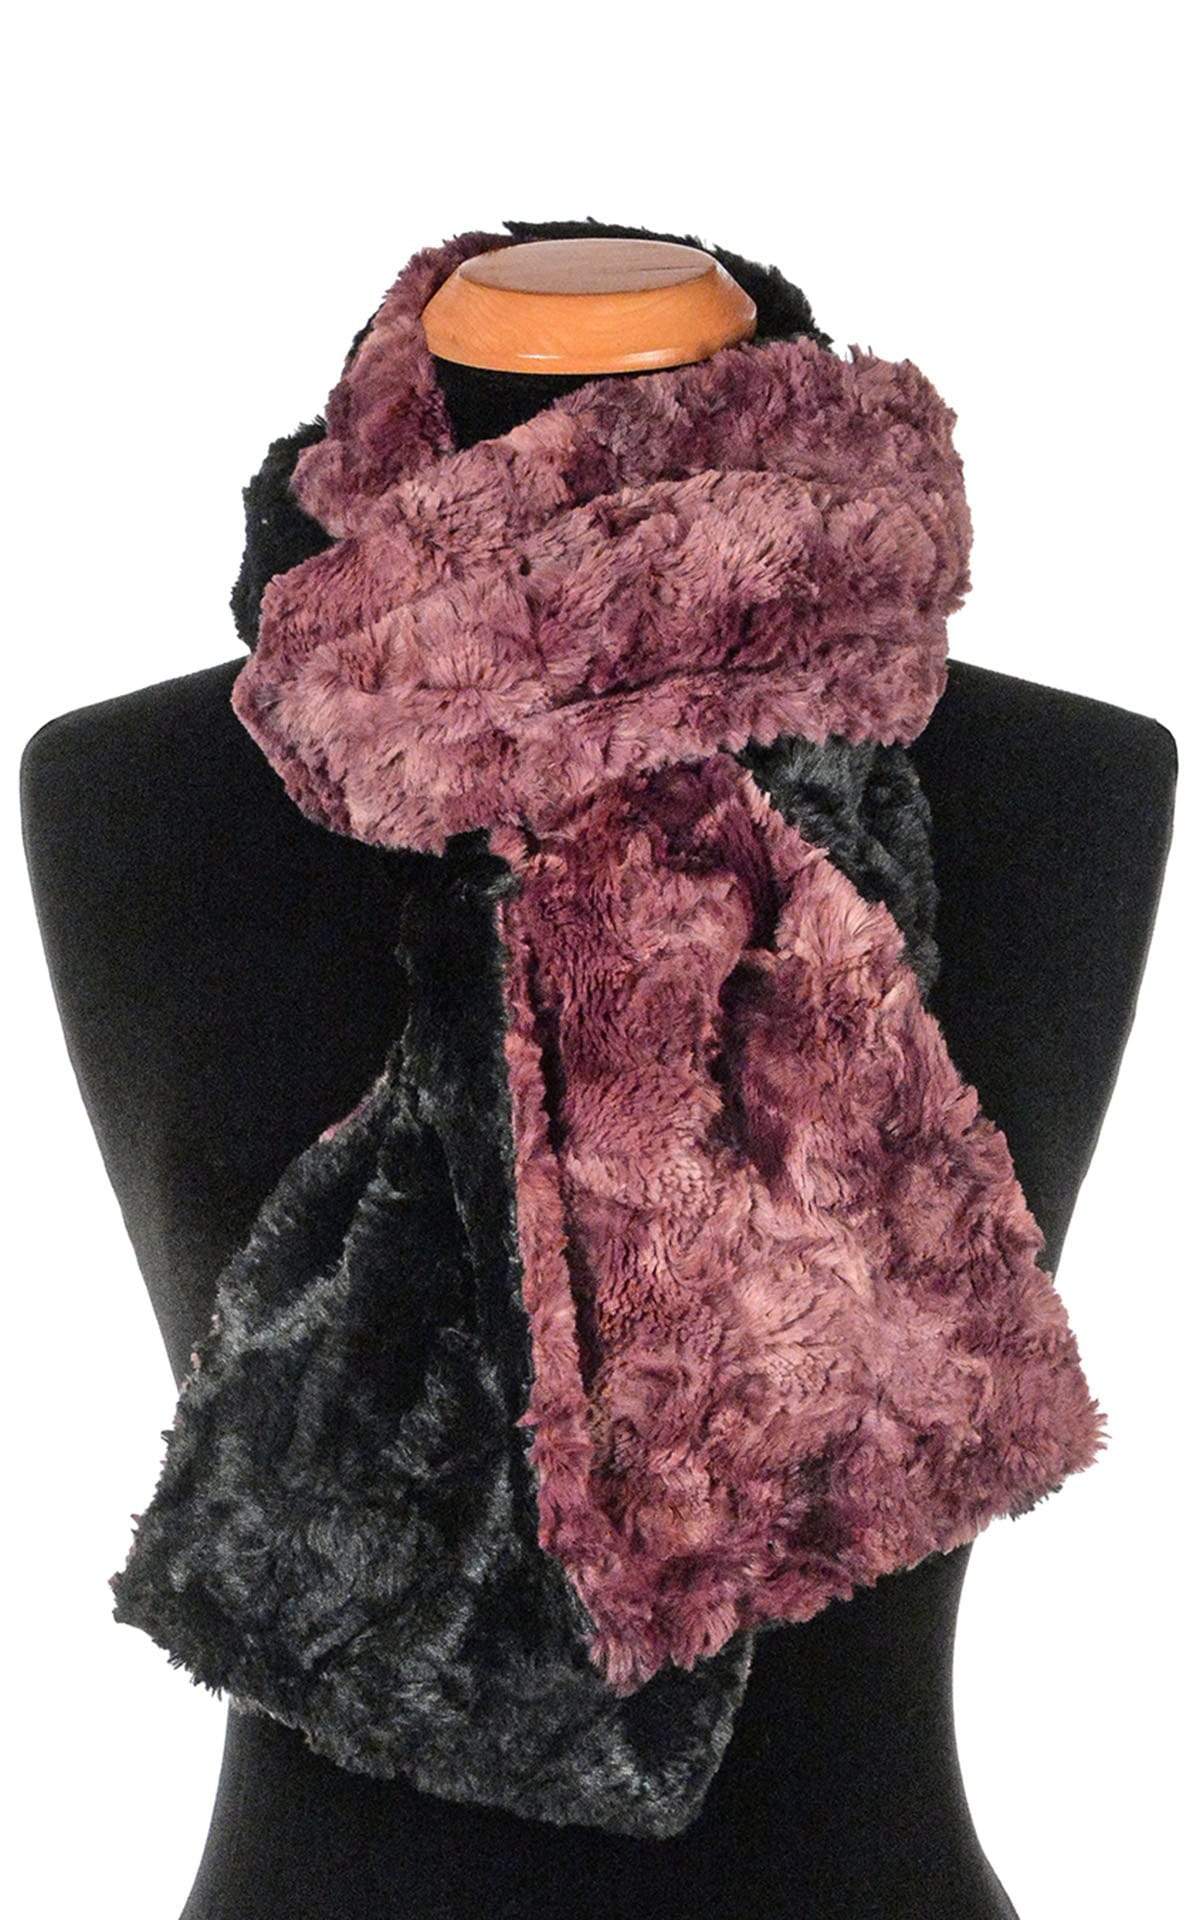 Pandemonium Millinery Classic Scarf - Two-Tone, Luxury Faux Fur in Highland (Meadow - SOLD OUT) Skinny / Thistle / Sand Scarves Wholesale